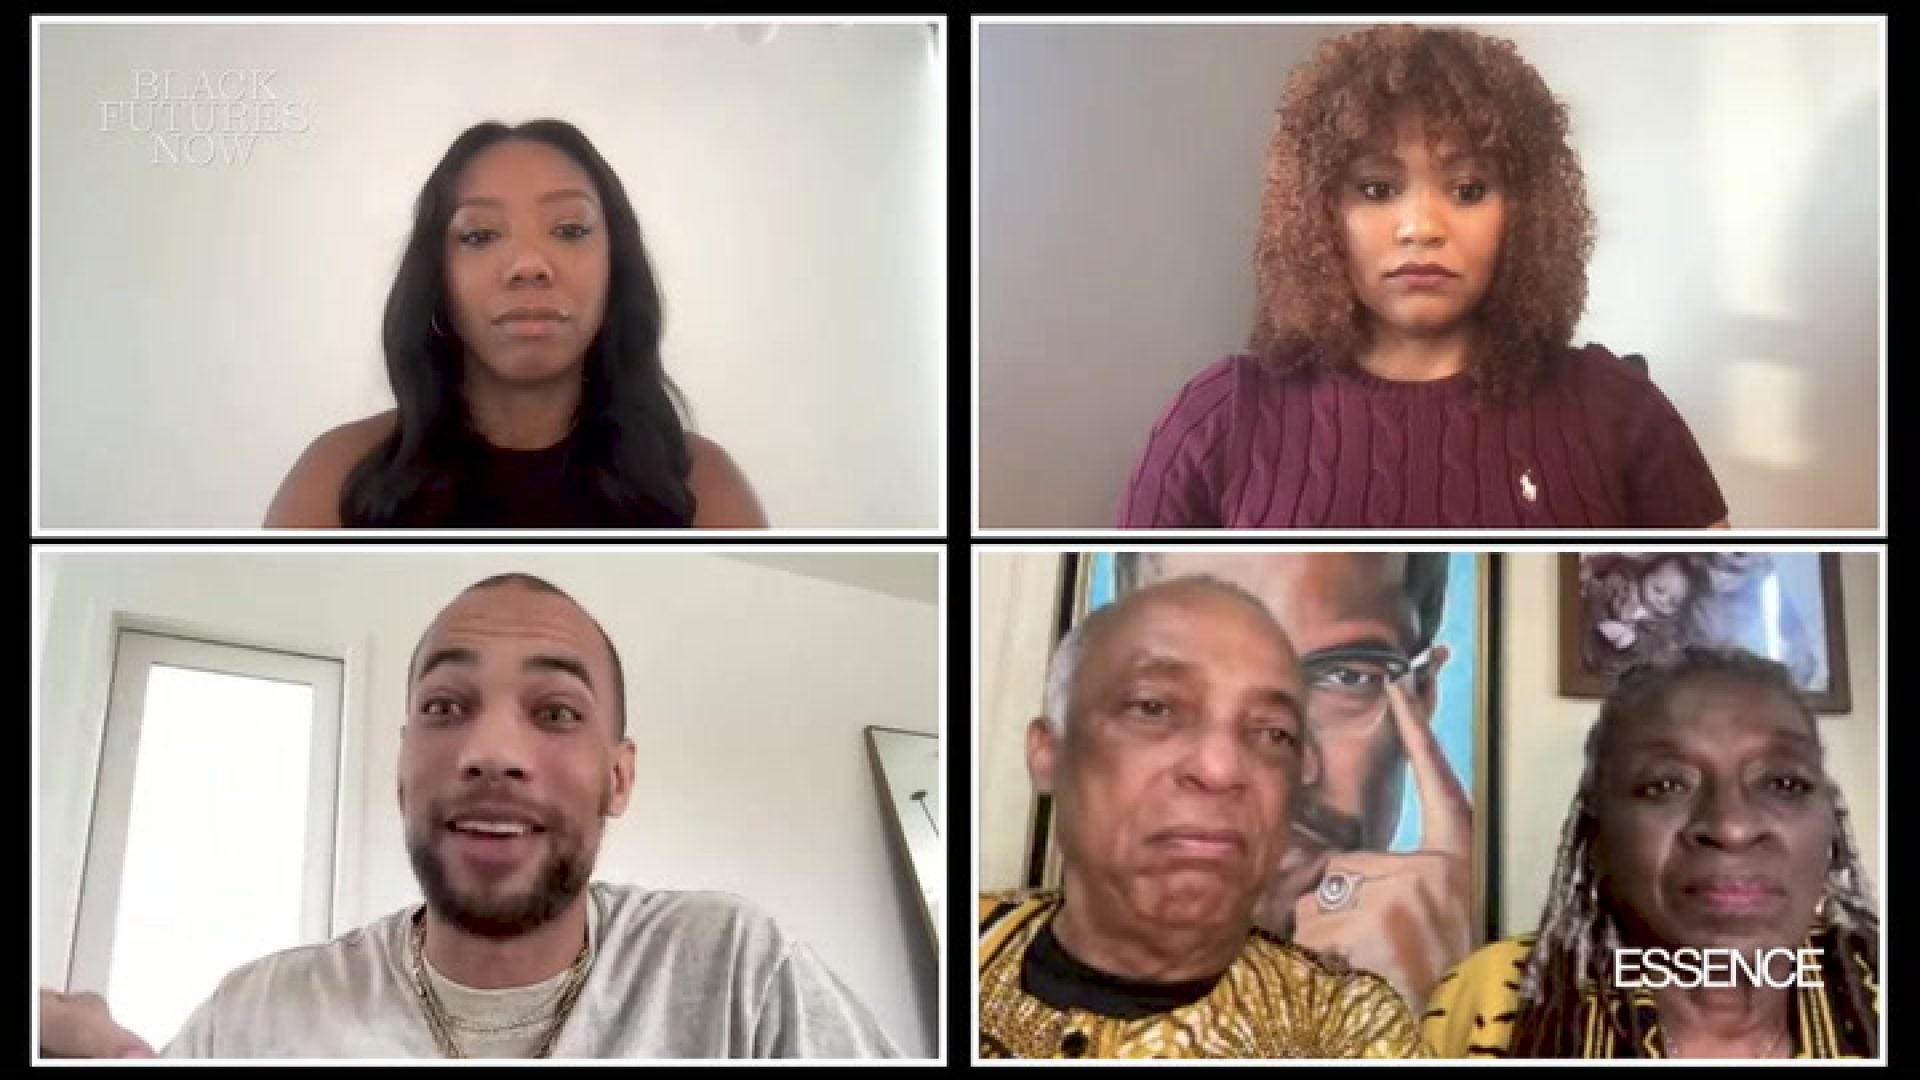 WATCH: ‘No Empire Lasts Forever’: ESSENCE Black Futures Now Honorees Discuss What Gives Them Hope For Our Future